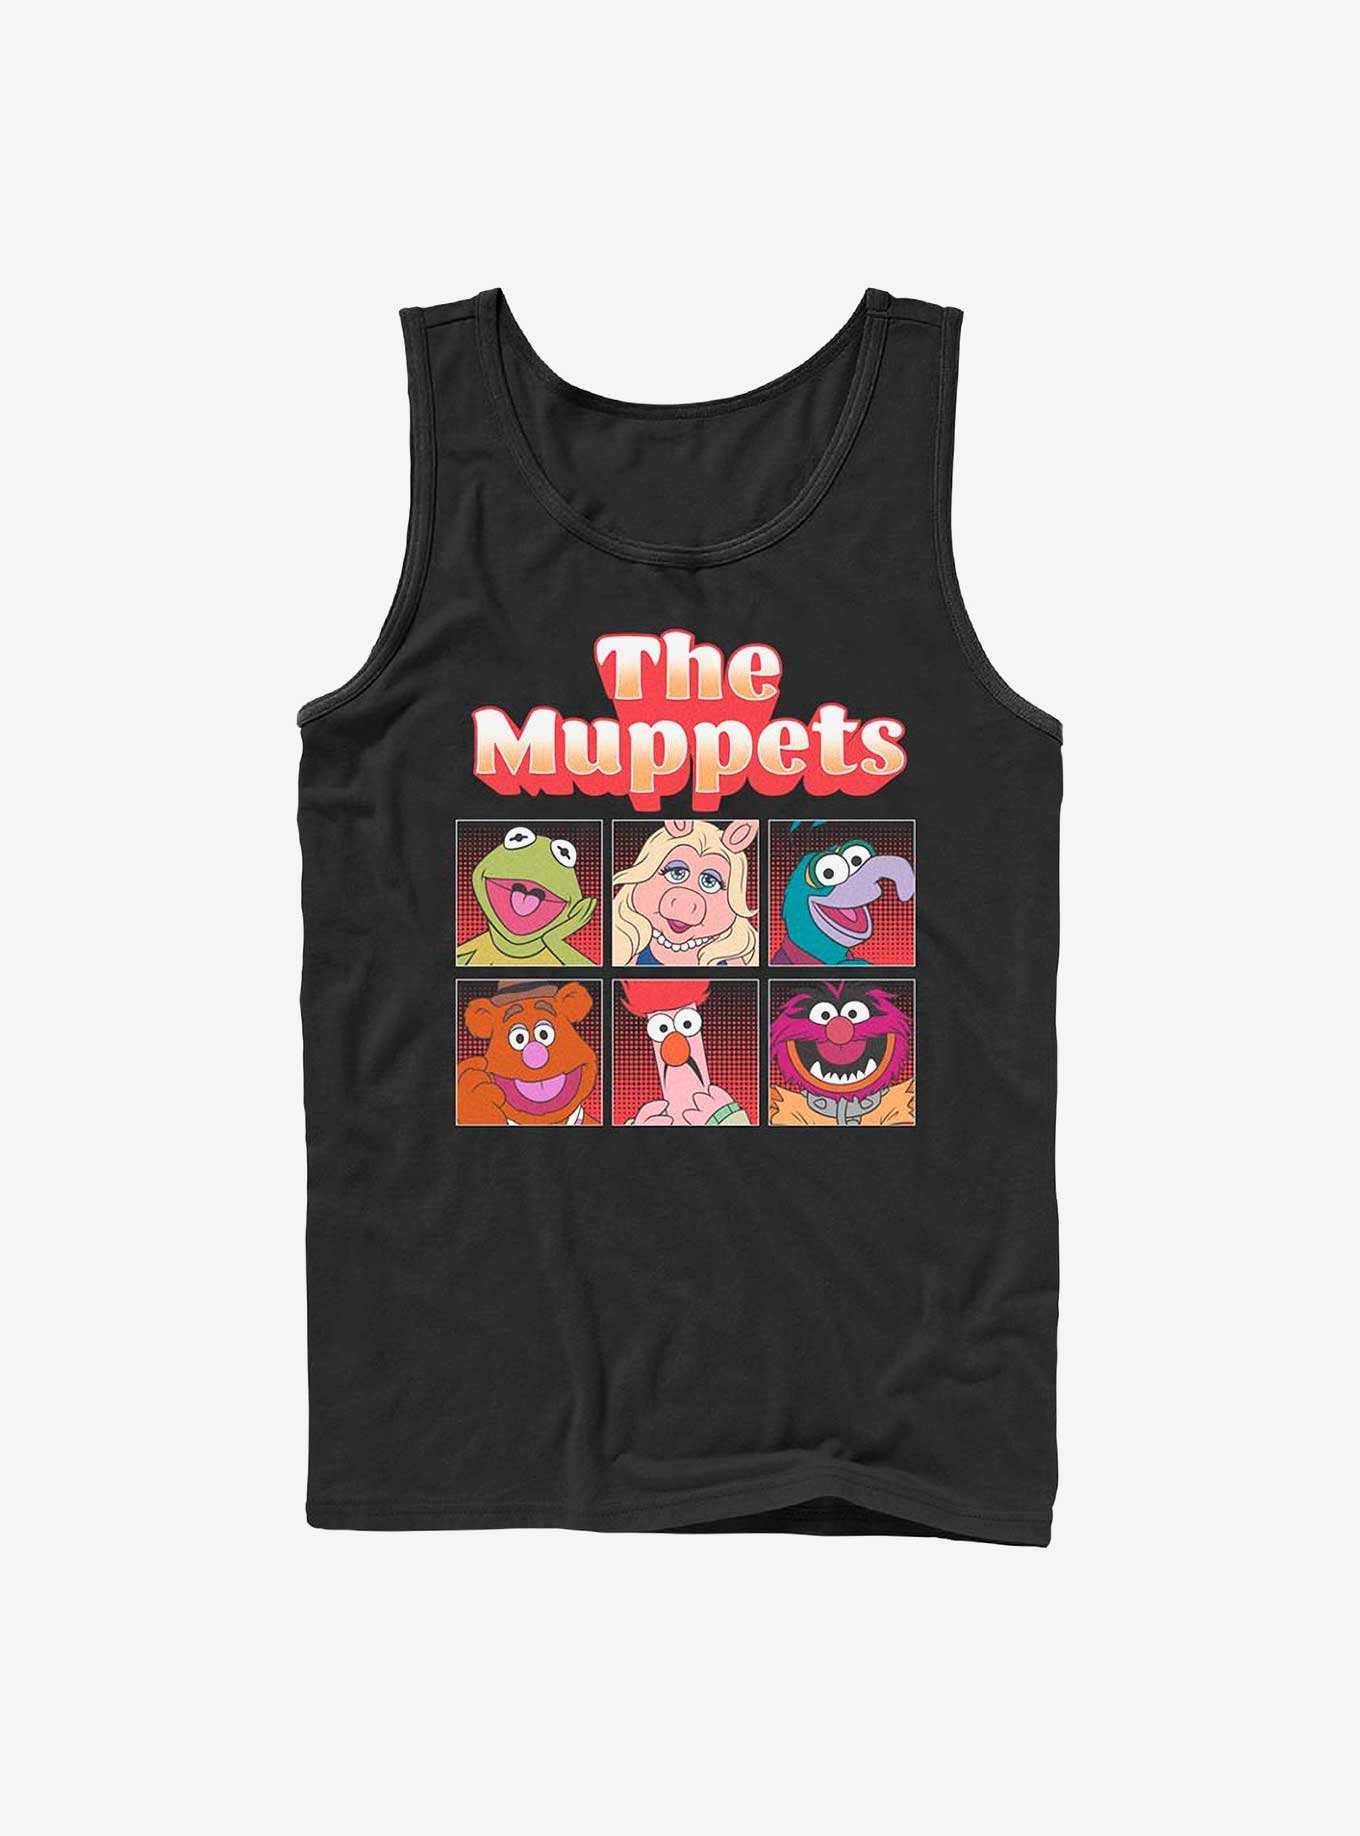 Disney The Muppets Muppet Group Tank Top, , hi-res